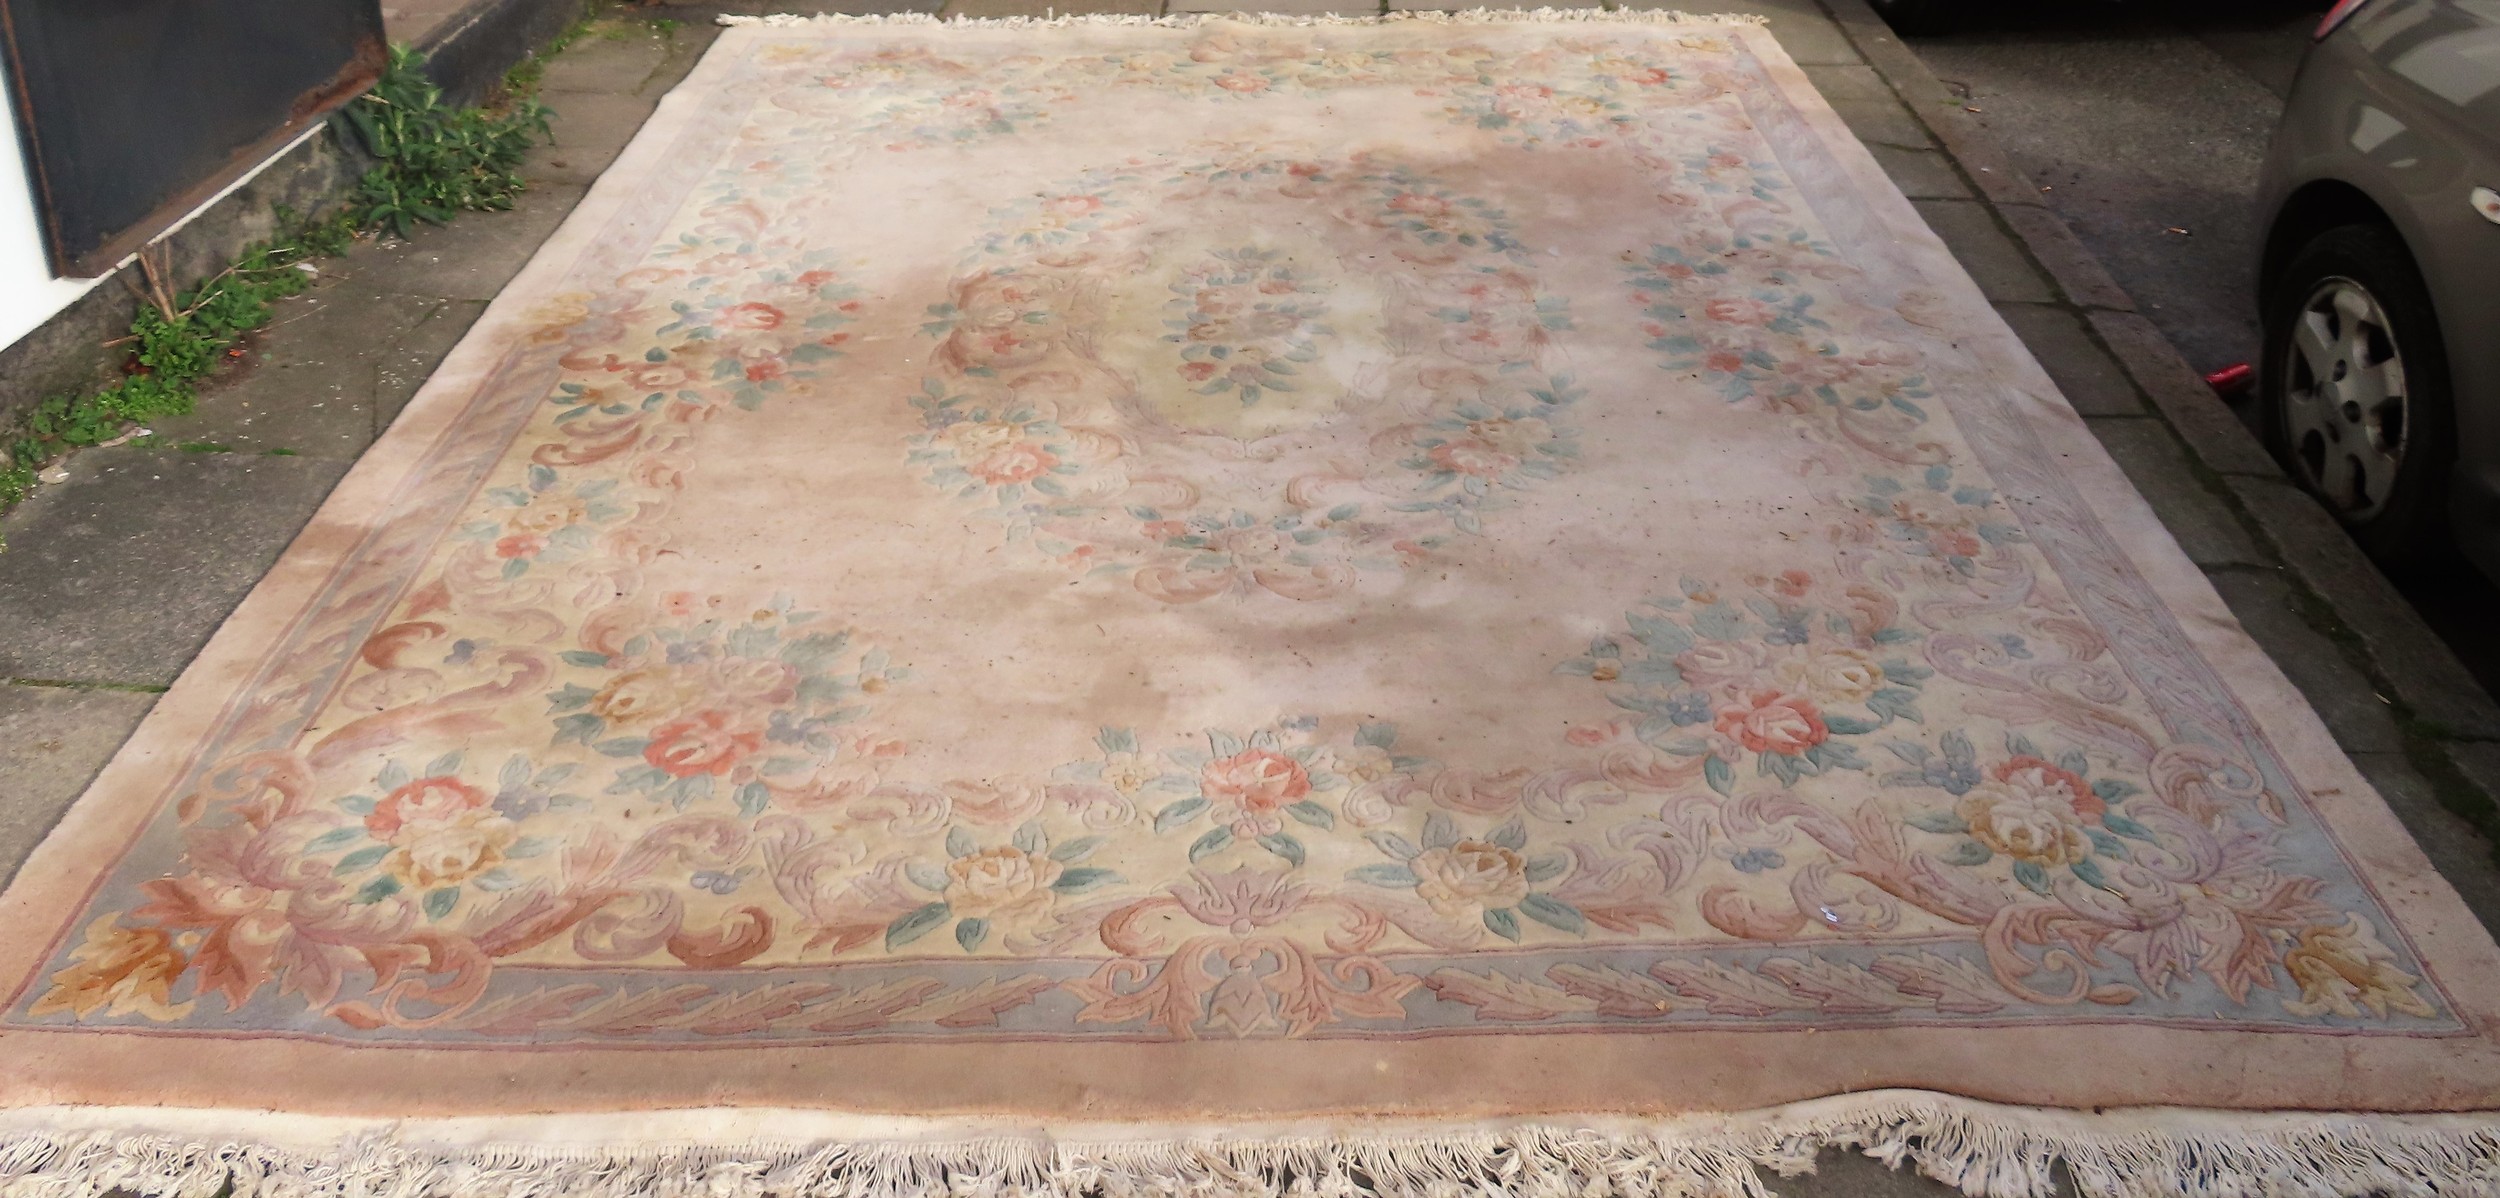 Very large Imperial Jewel floor rug. App. 366x 274cm Reasonable used condition, needs a good clean